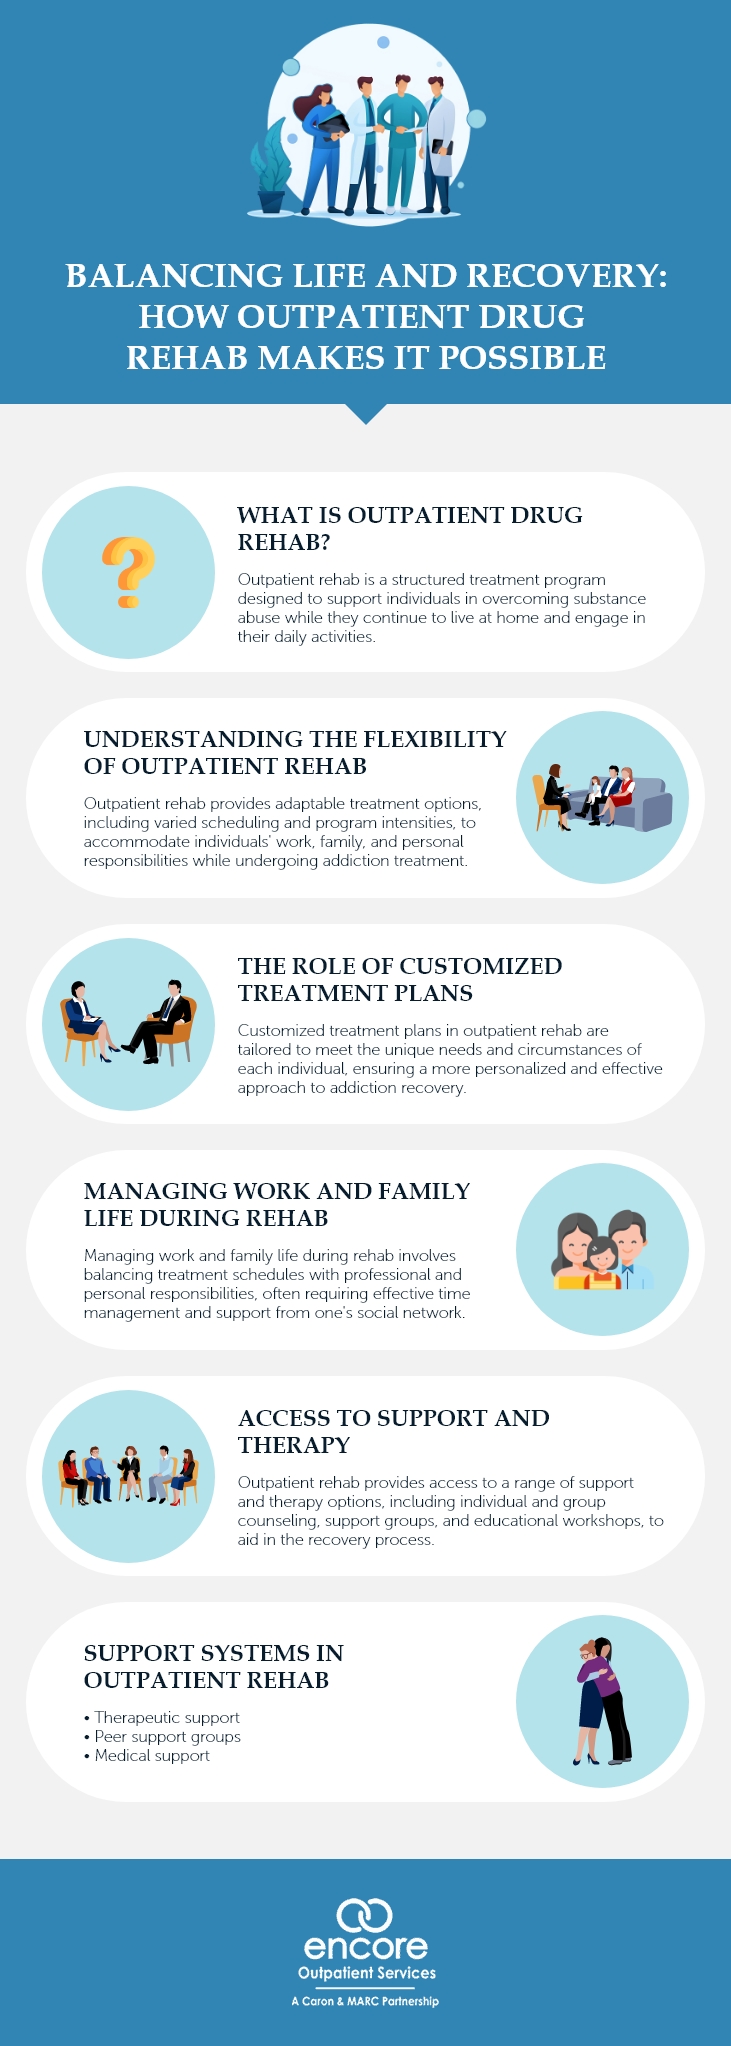 Balancing Life and Recovery How Outpatient Drug Rehab Makes It Possible